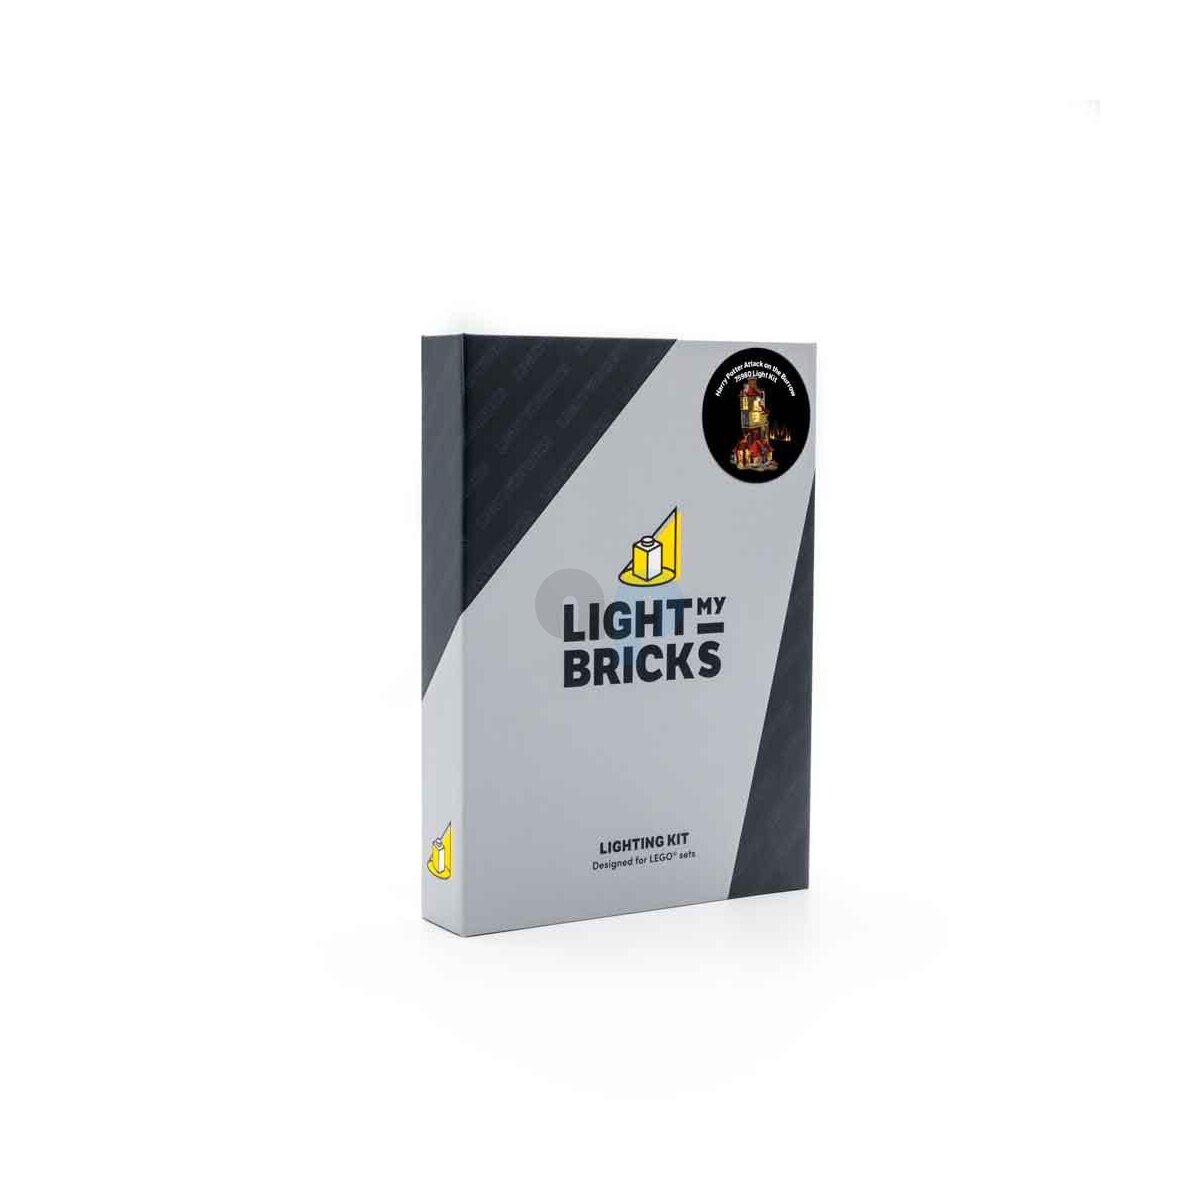 Details about   LED LIGHT KIT FOR LEGO 75980 ATTACK ON THE BURROW LEGO Harry Potter LIGHTING KIT 